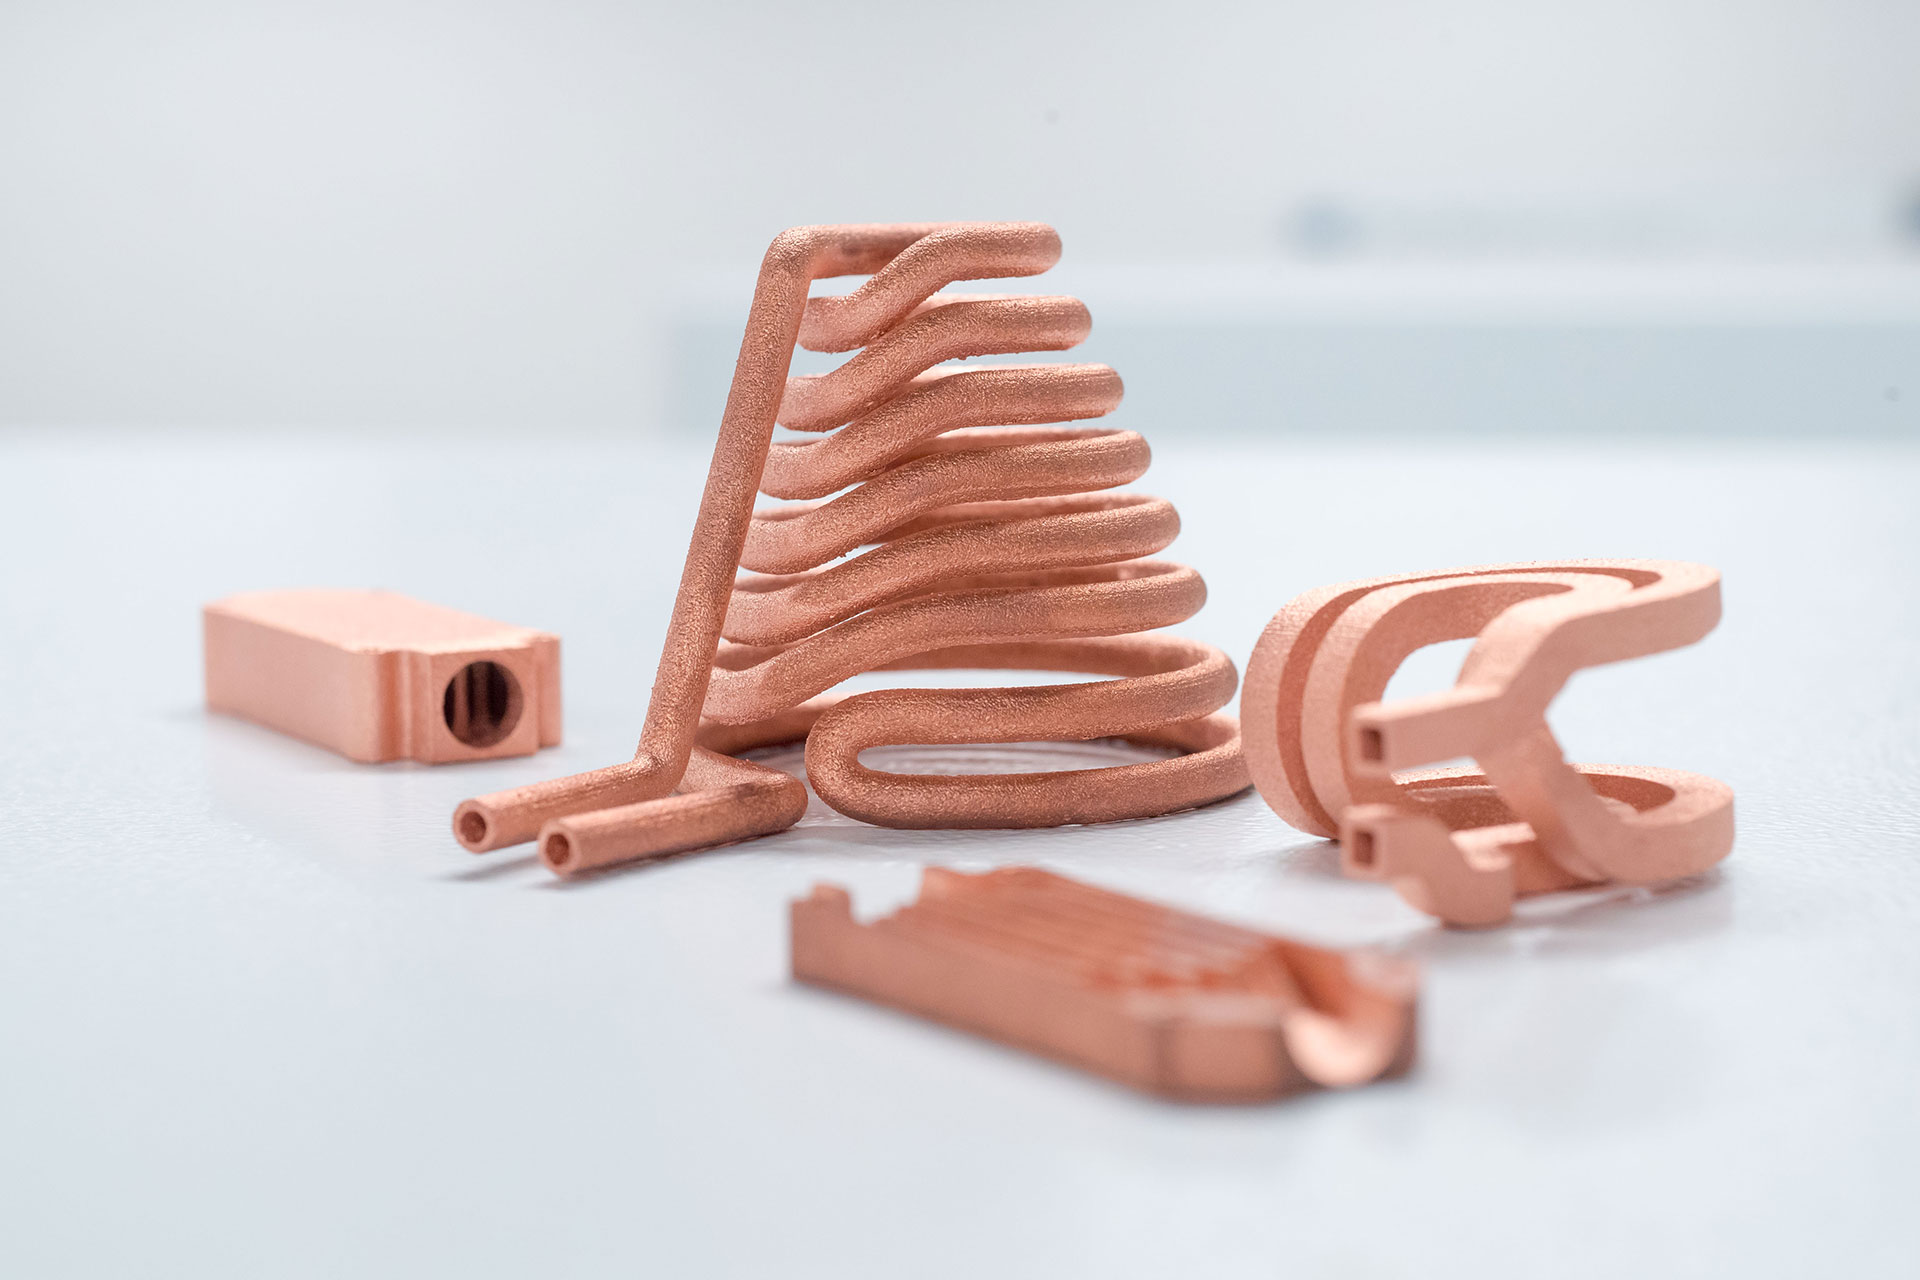 Laser beam melting (LPBF) of copper and its alloys enables the production of complex components for a wide range of applications